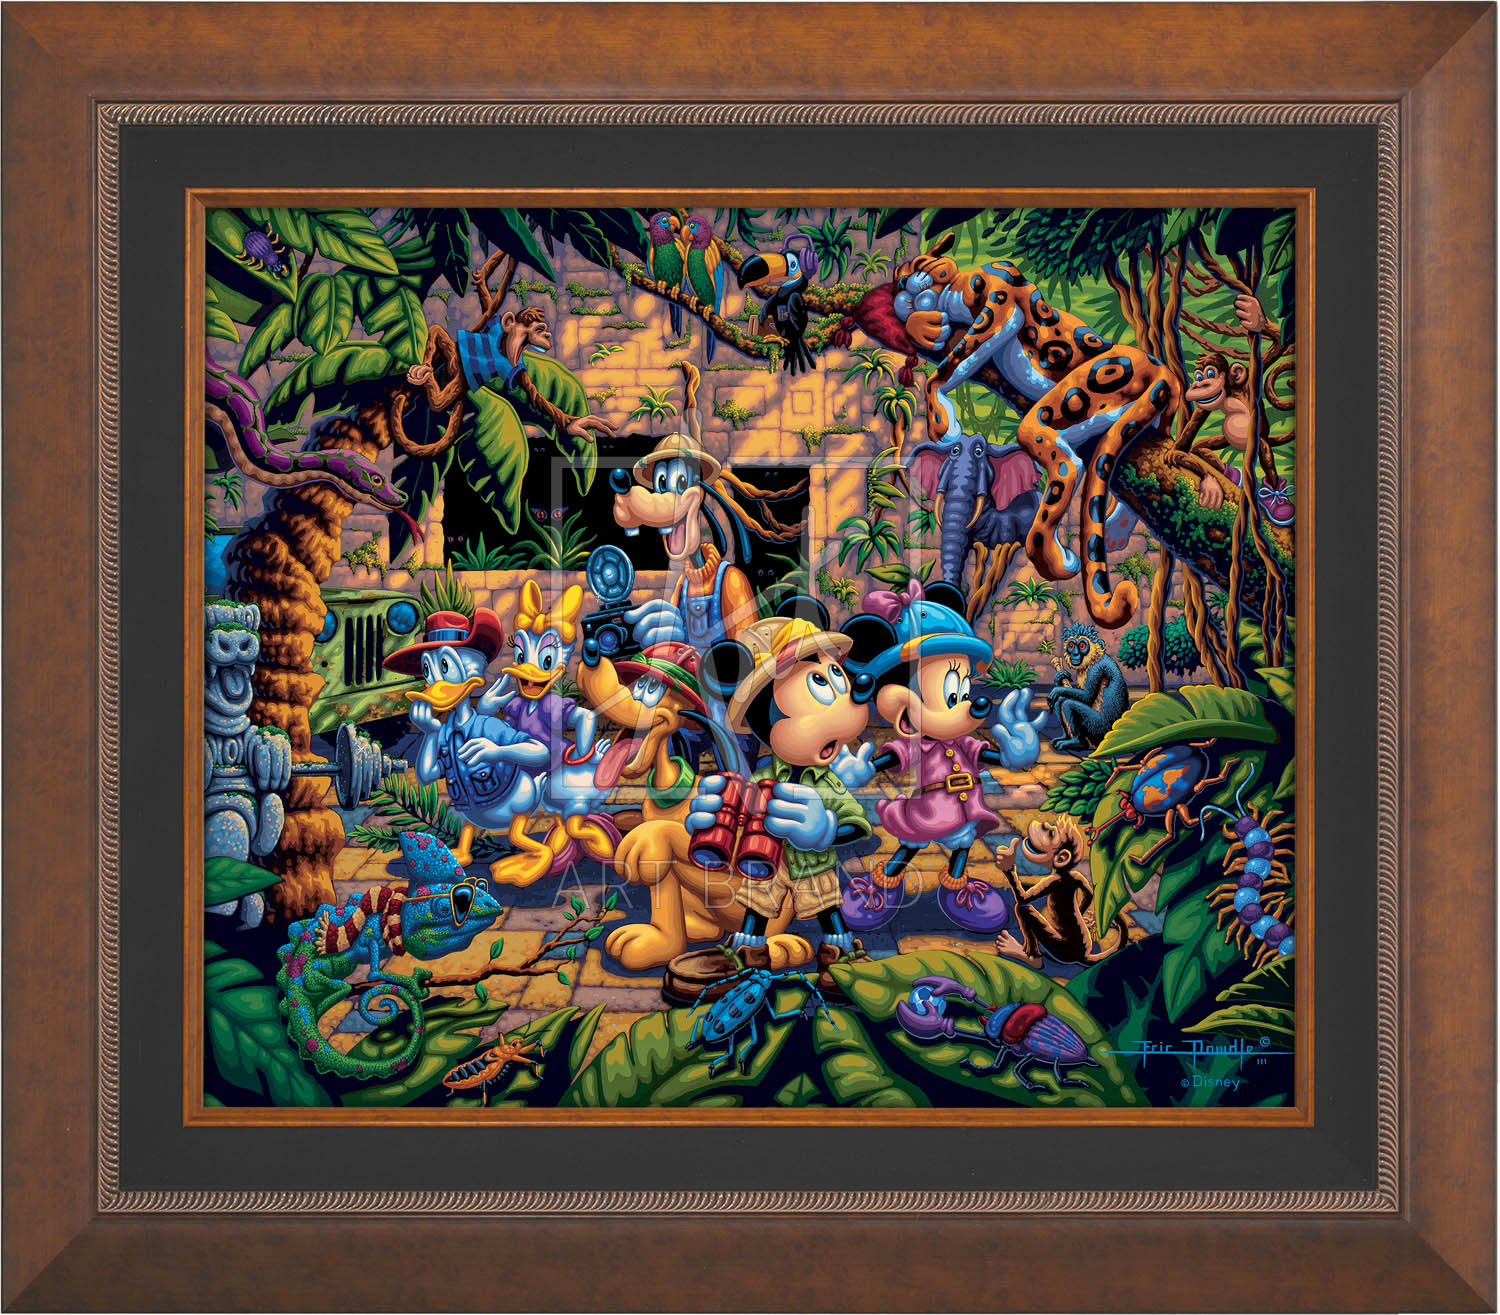 The lush jungle vegetation supports a variety of creatures great and small, including a chameleon, a variety of insects, a snake, birds, monkeys, and even a leopard and an elephant. Mickey and friends find themselves in the center of it all! - Aurora Copper frame